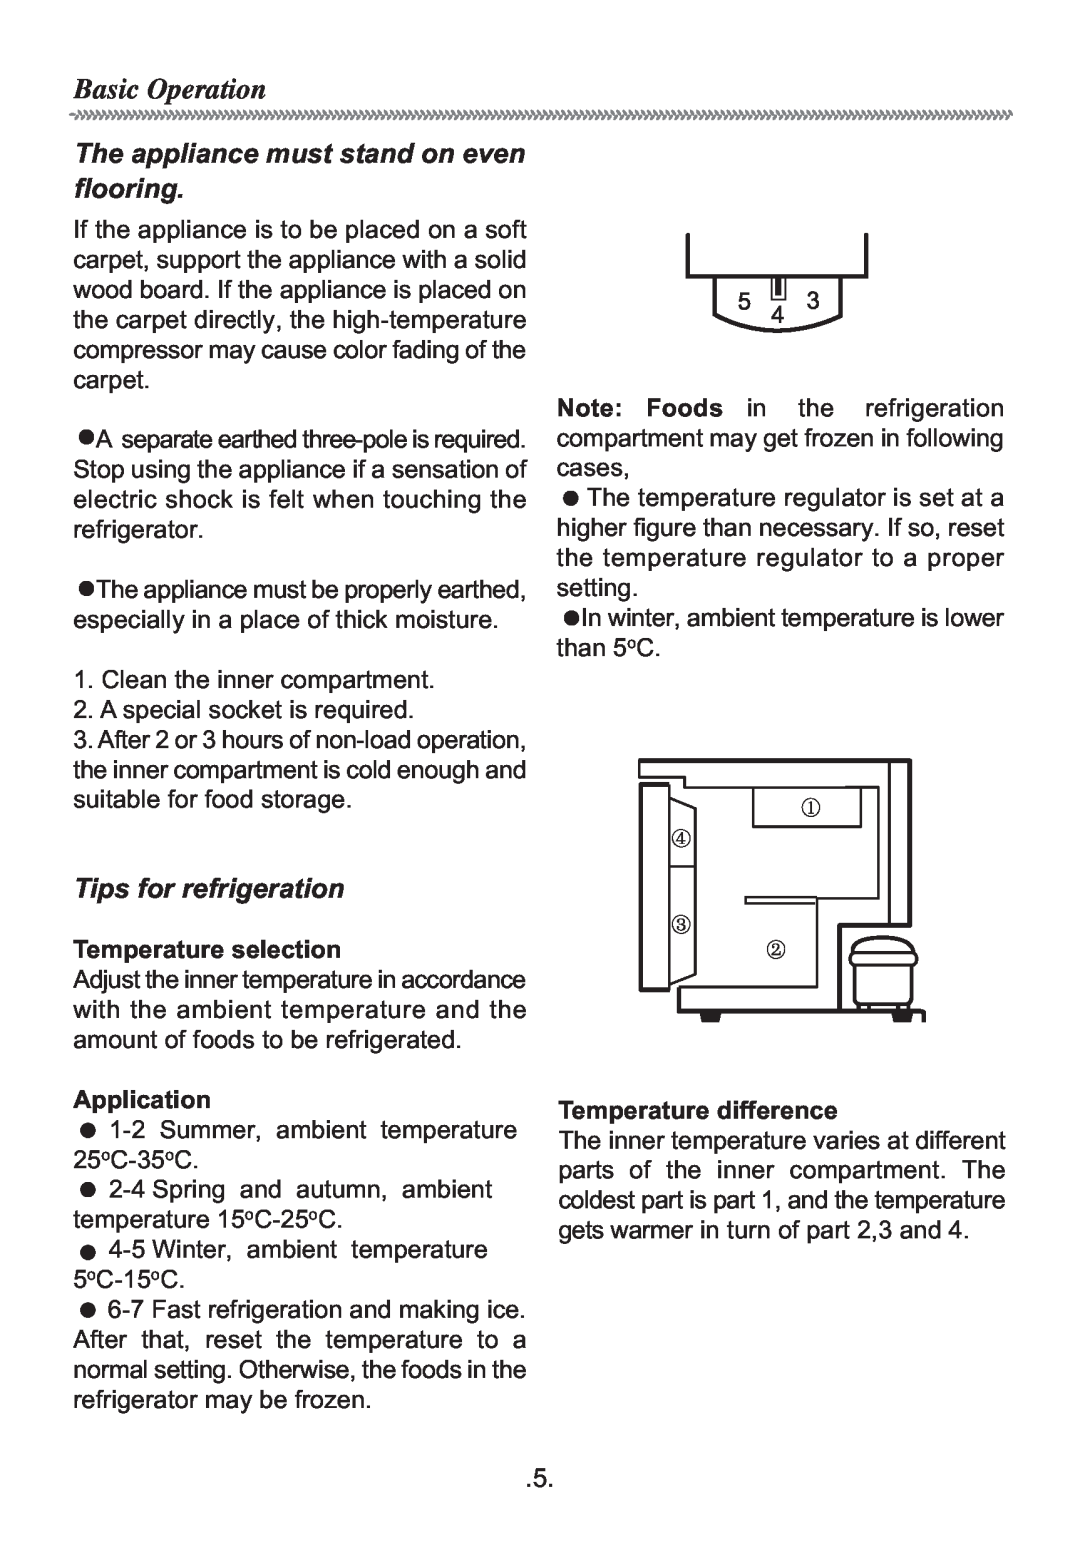 Haier HR-62 Basic Operation, The appliance must stand on even flooring, Tips for refrigeration, Temperature selection 